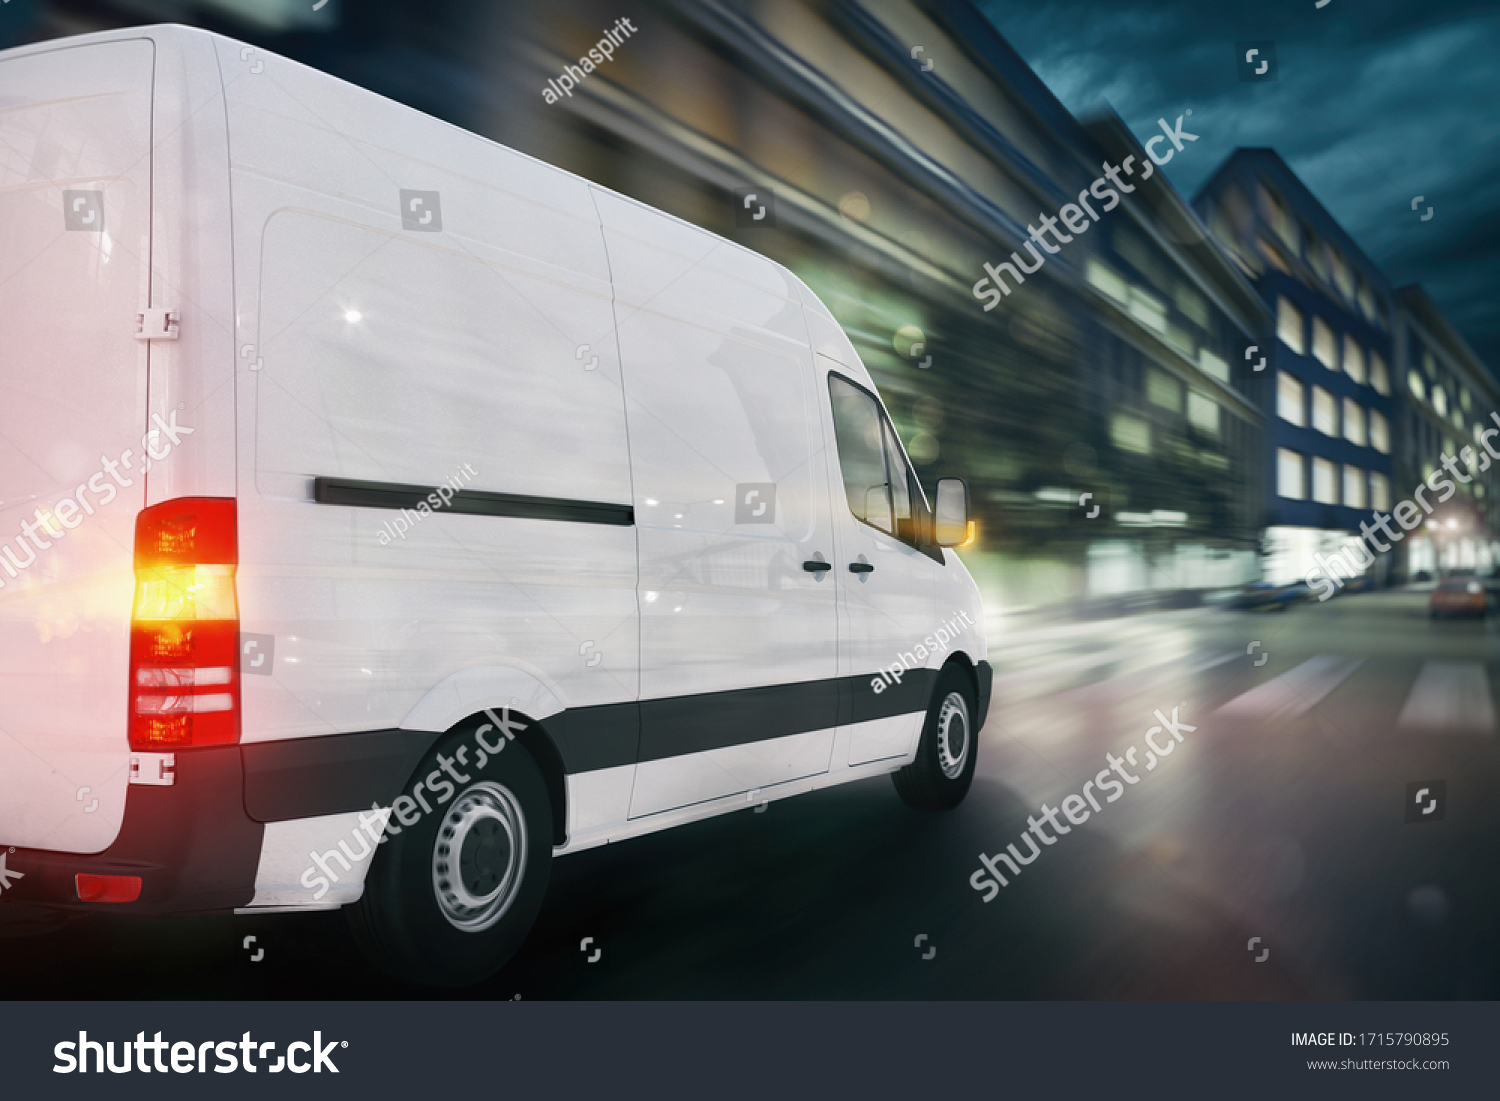 Super fast delivery of package service with a fast moving van on cityscape #1715790895